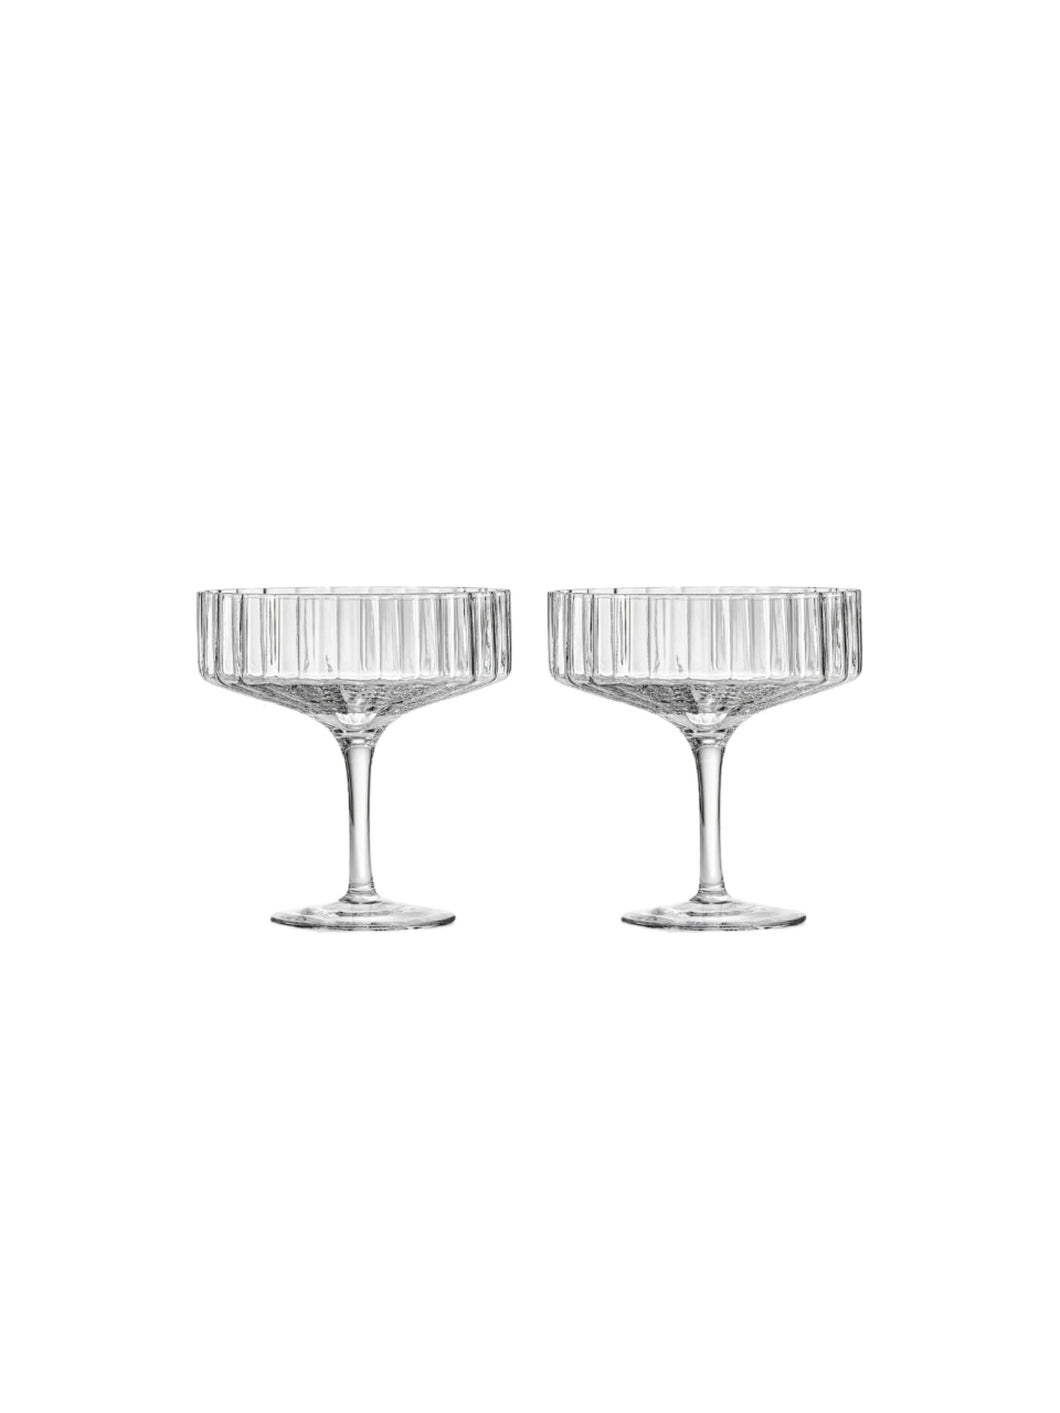 MODERNISM | Cullinan Crystal Champagne Coupe Glasses